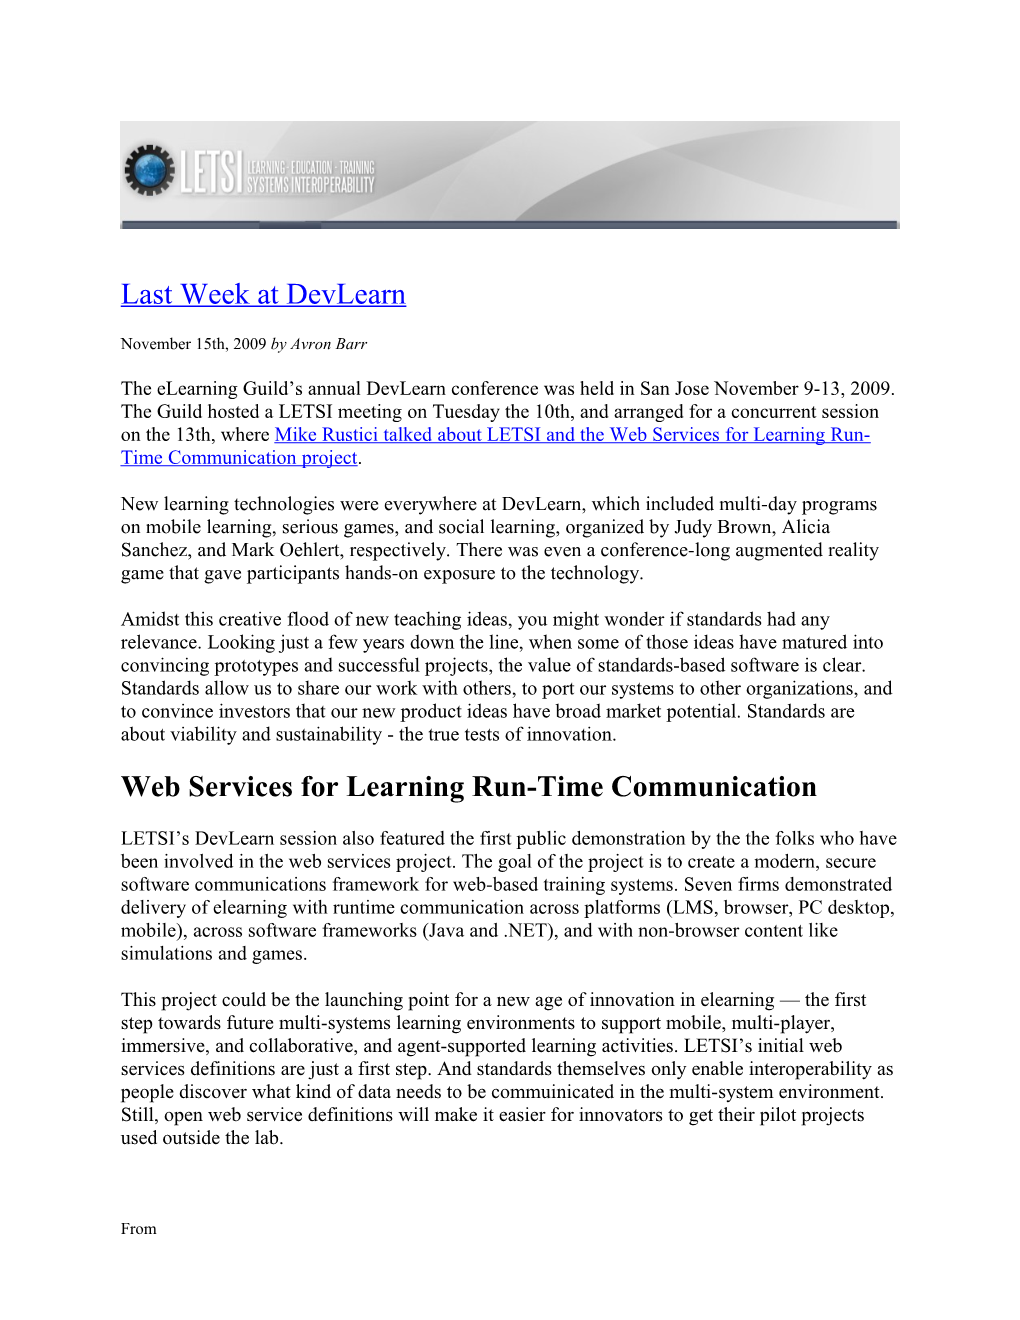 Web Services for Learning Run-Time Communication